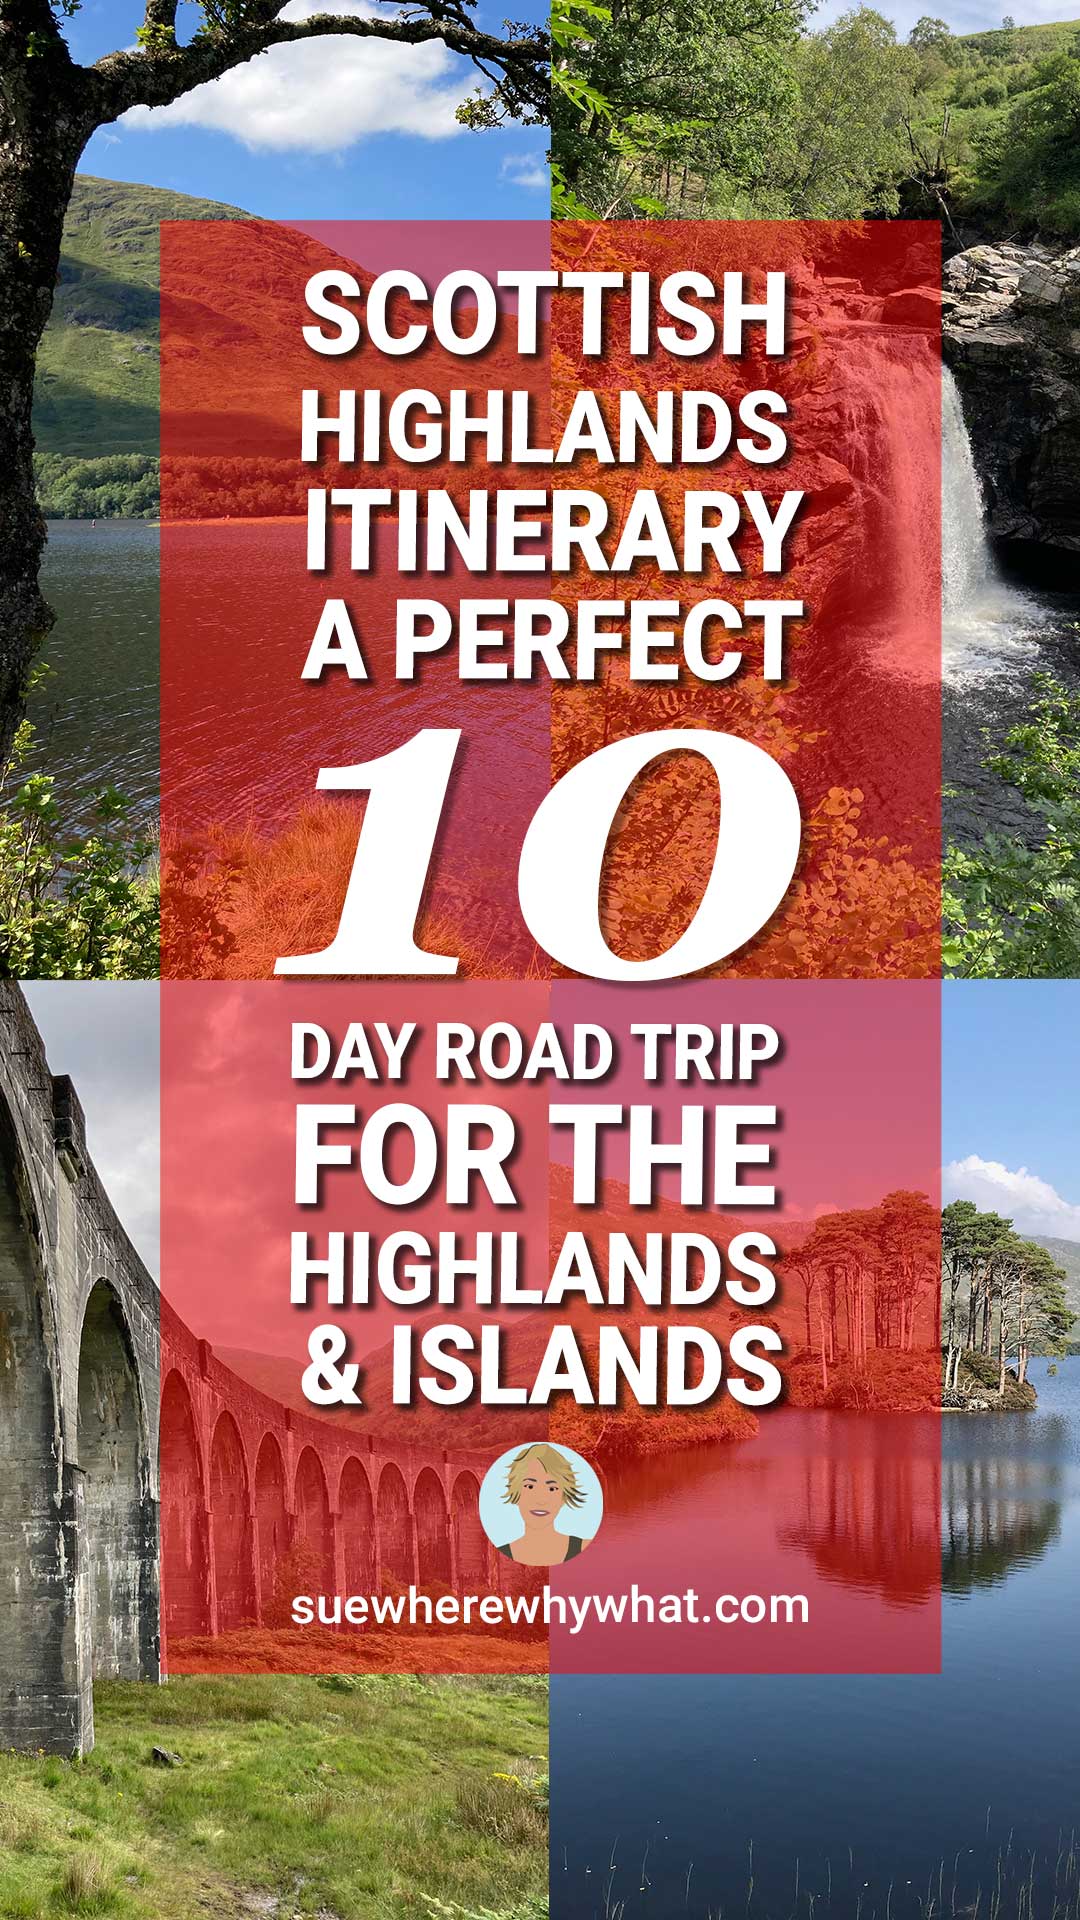 Scottish Highlands Itinerary – A Perfect 10 Day Road Trip for the Highlands & Islands